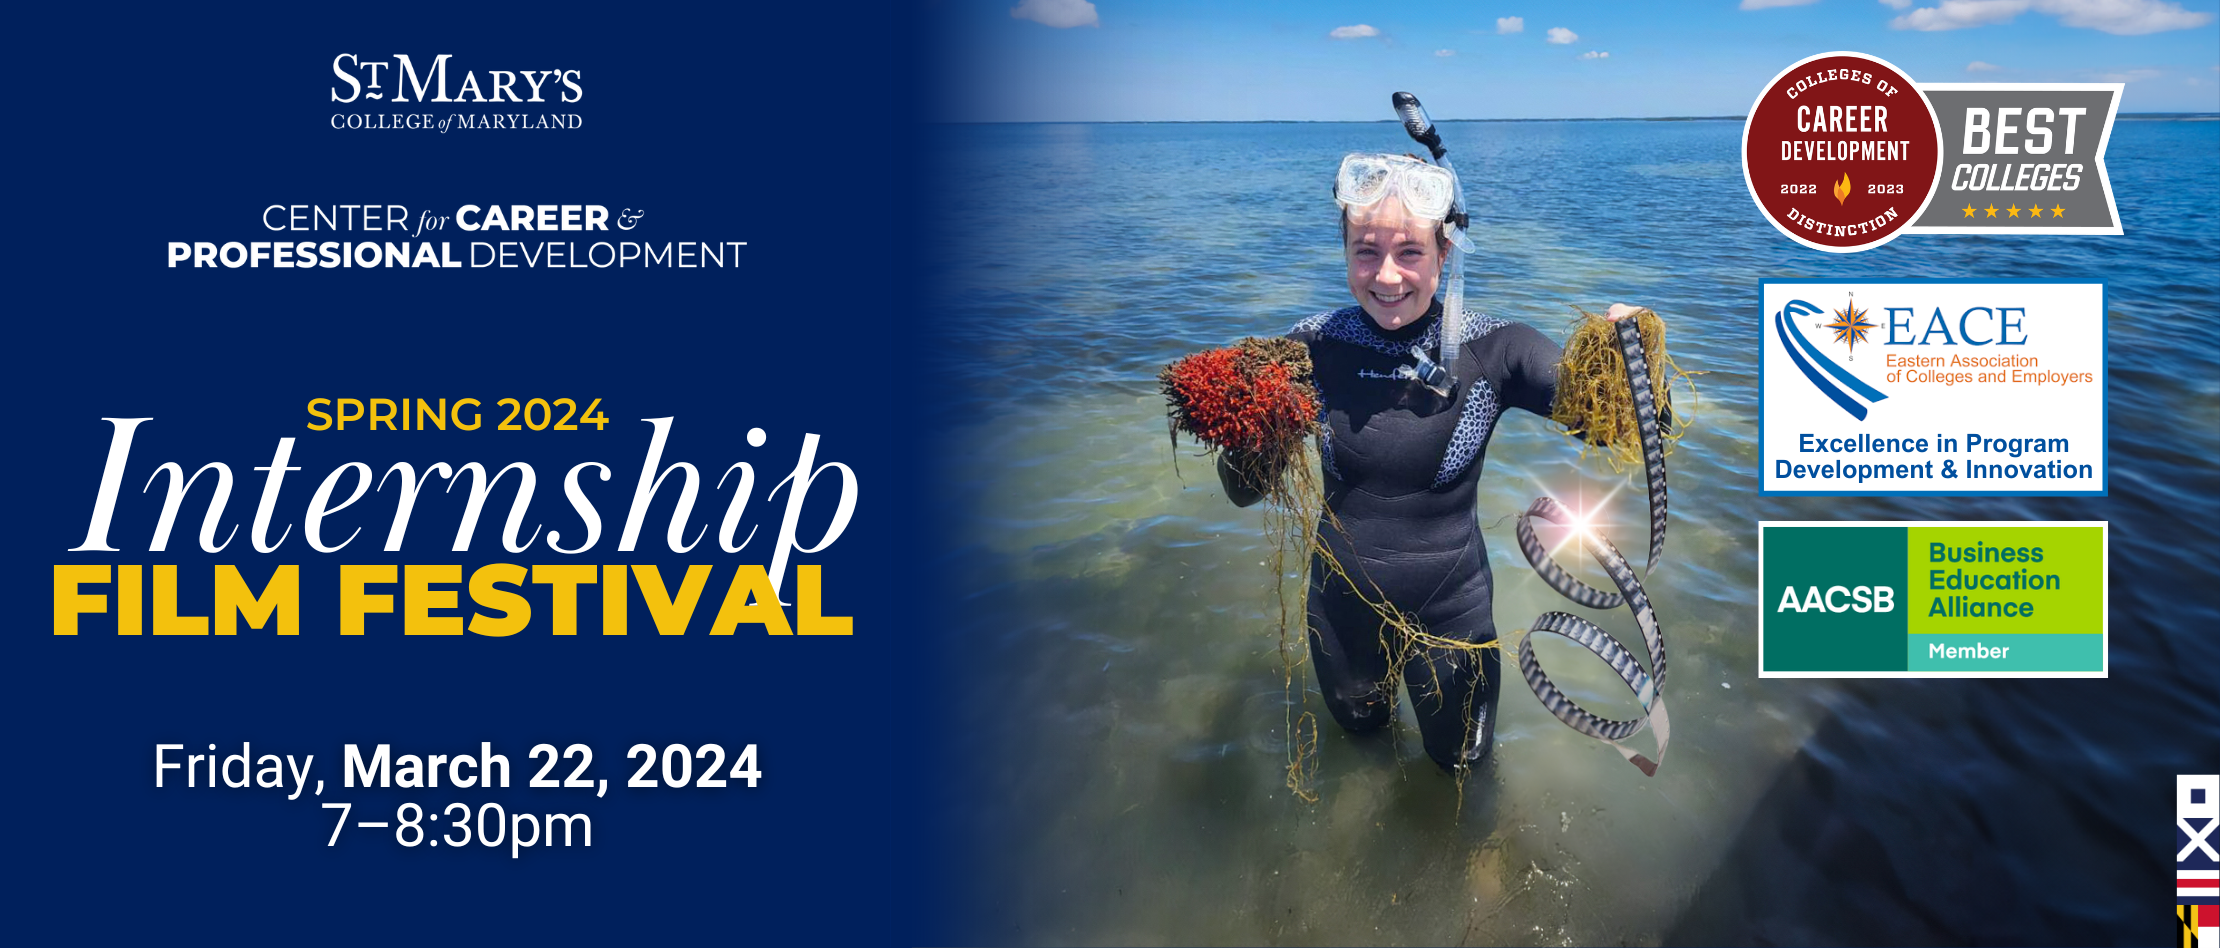 Image showing a photo of an intern holding kelp beds and a filmstrip. The image contains the text: St. Mary’s College of Maryland Center for Career & Professional Development, Spring 2024 Internship Film Festival, Friday, March 22, 7–8:30pm.